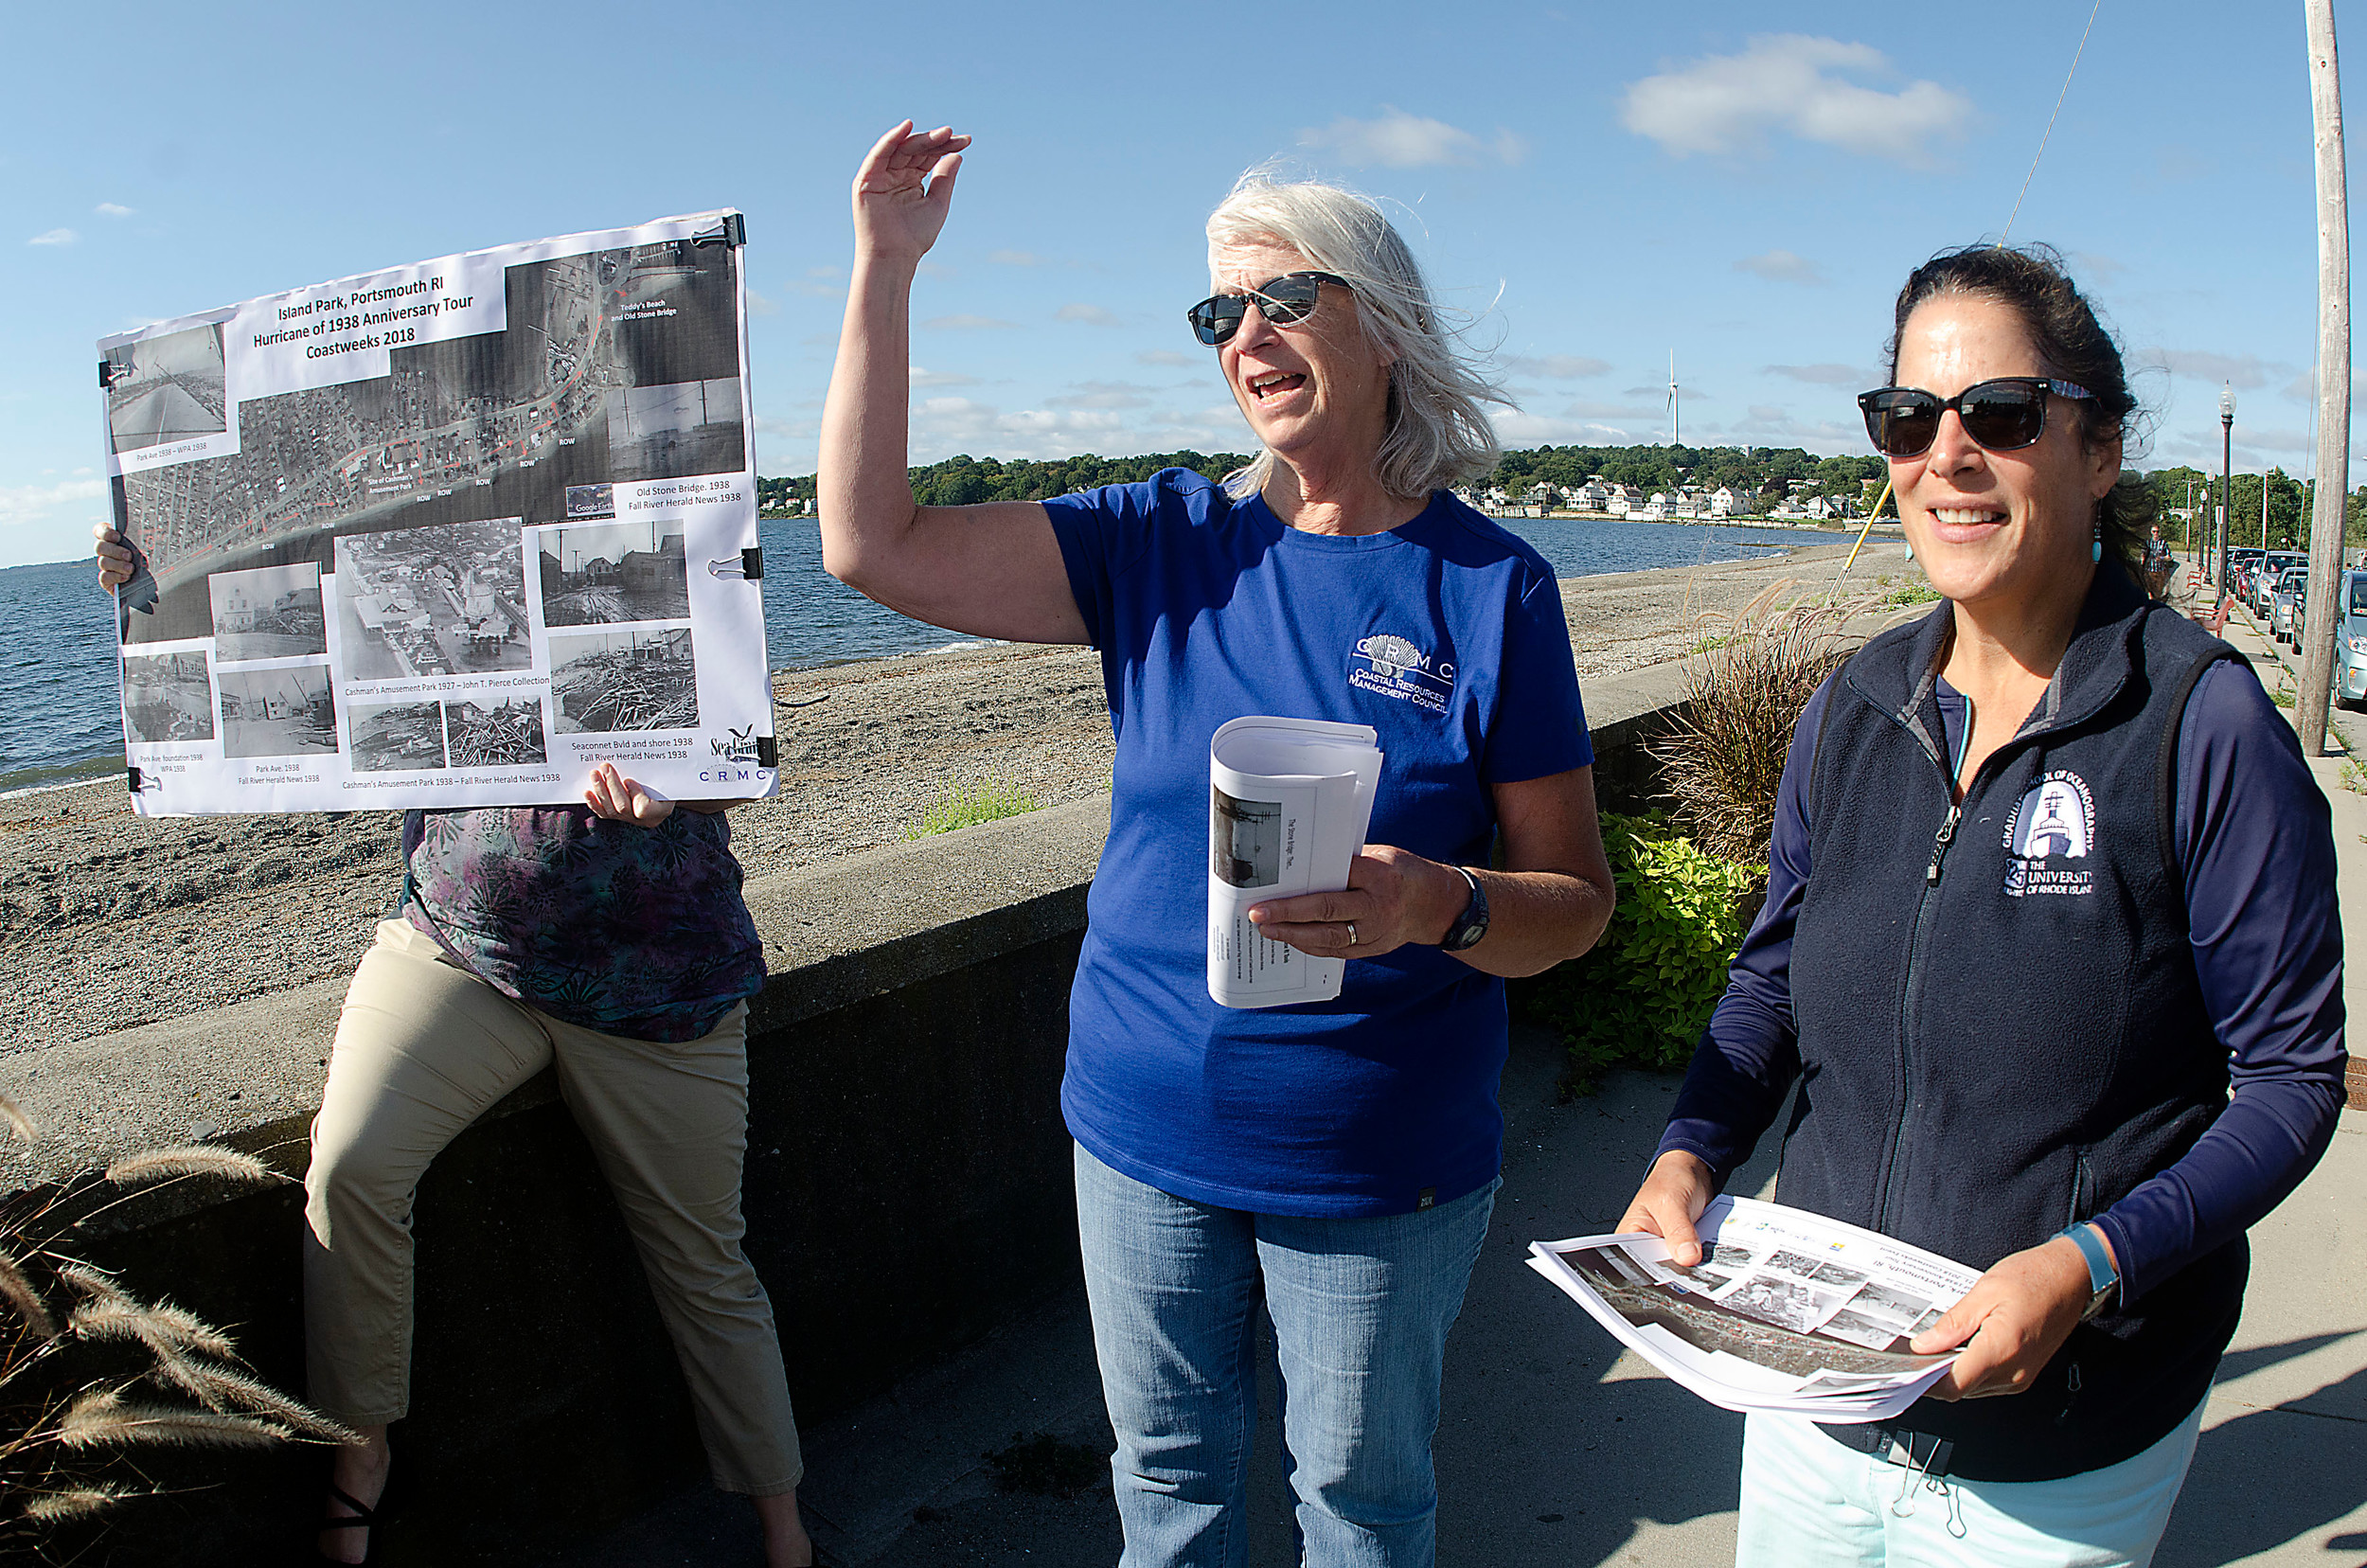 Jennifer West of the Narragansett Bay Research Reserve, Janet Freedman of CRMC and Pam Rubinoff of URI Coastal Resources (from left) kick off a 1938 Hurricane anniversary walk tour in Island Park.